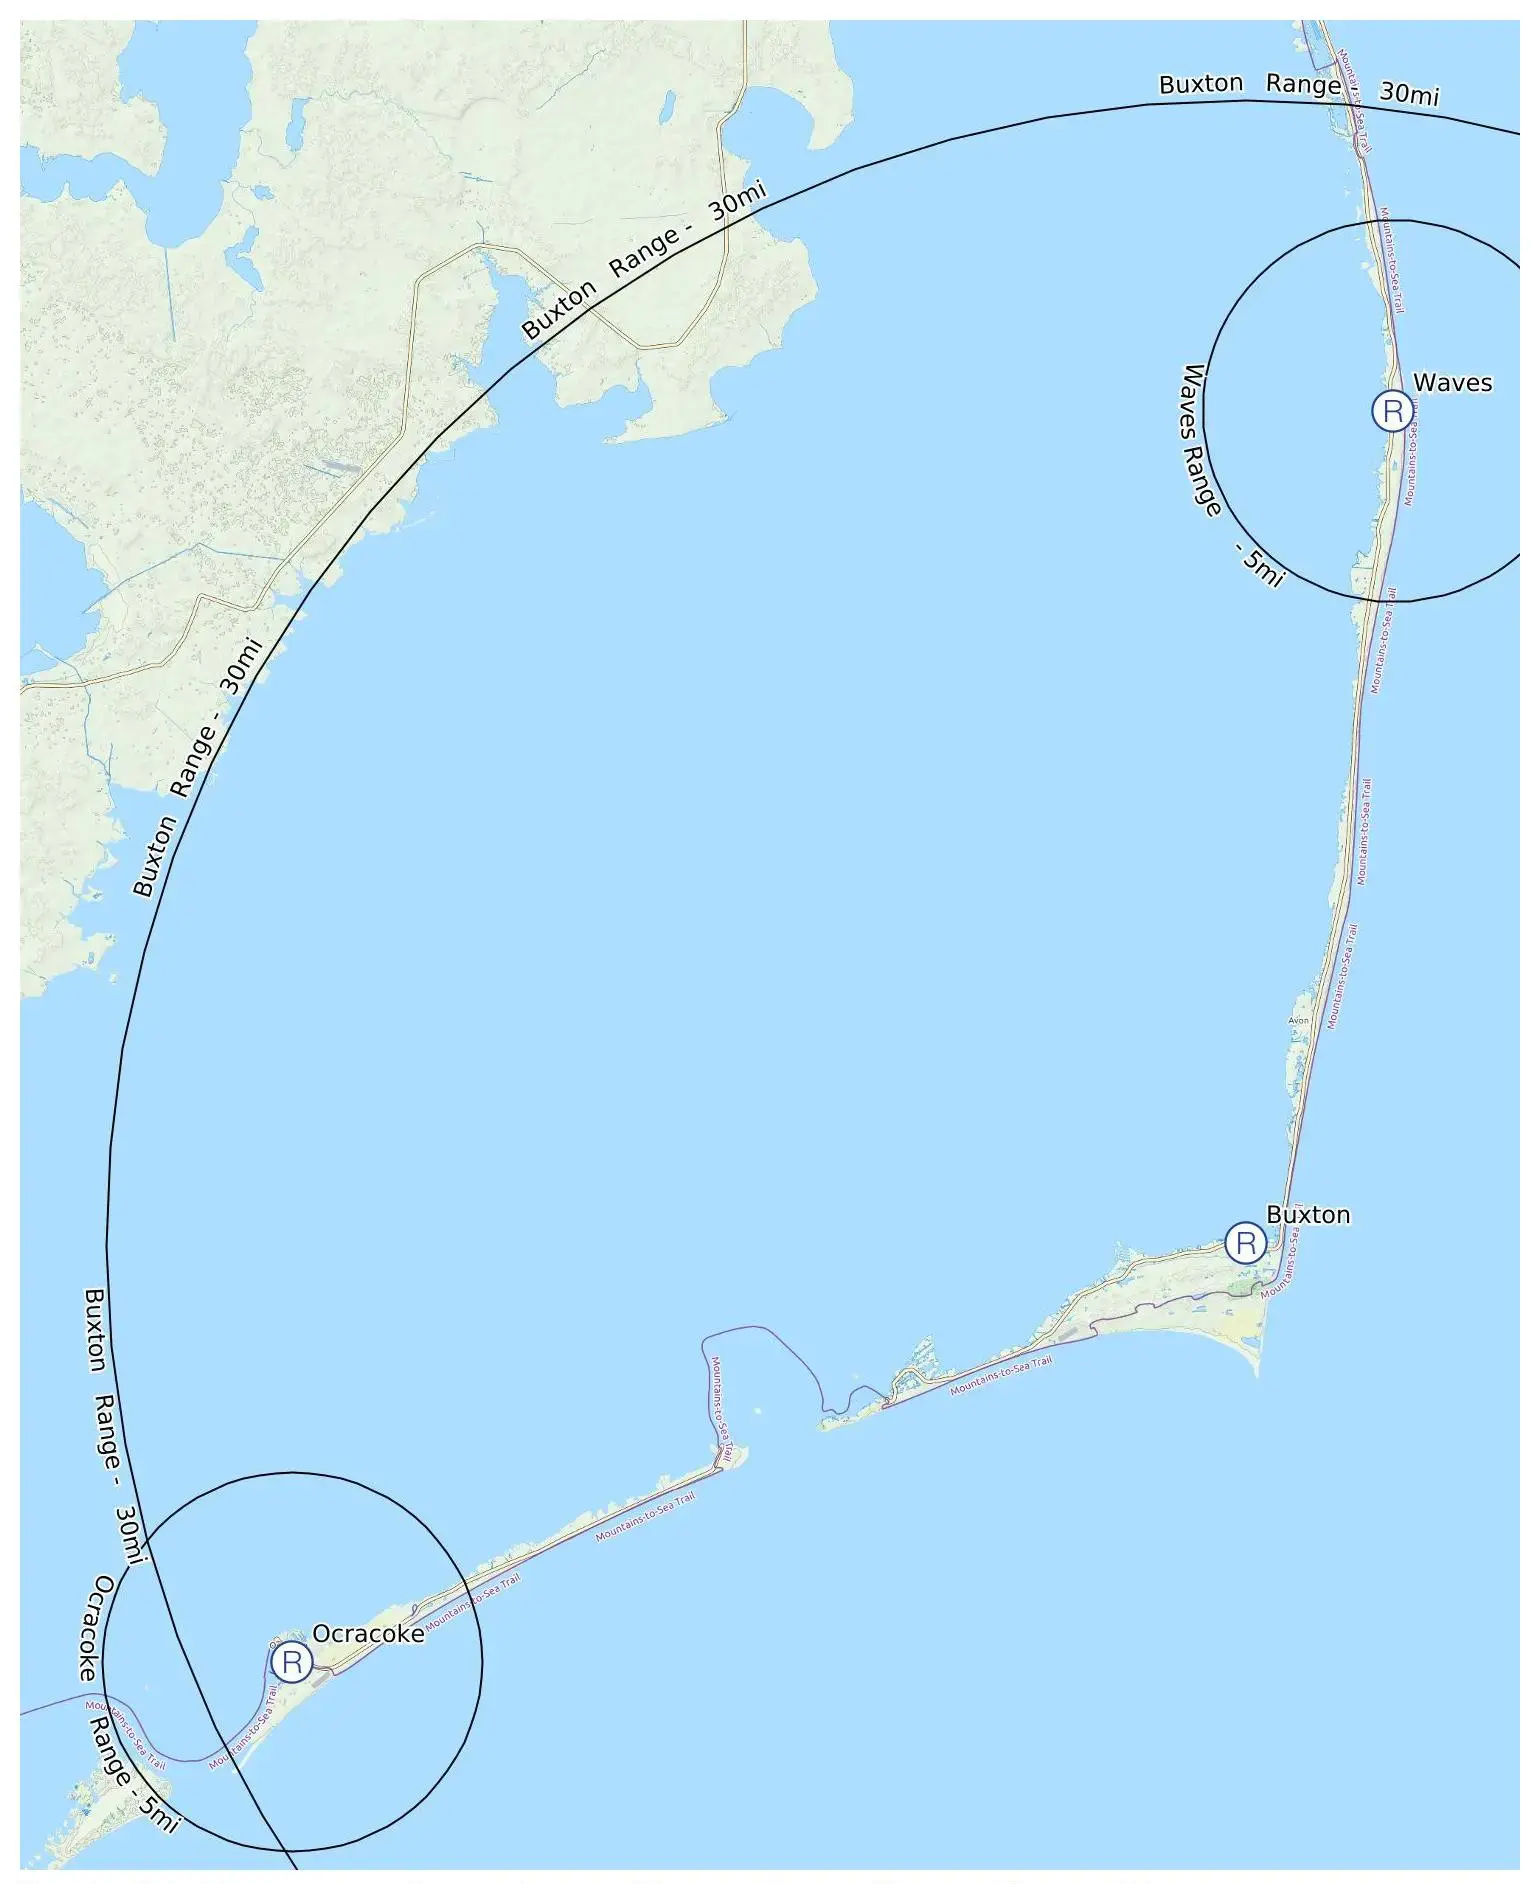 Repeaters on Hatteras Island that are linked together.